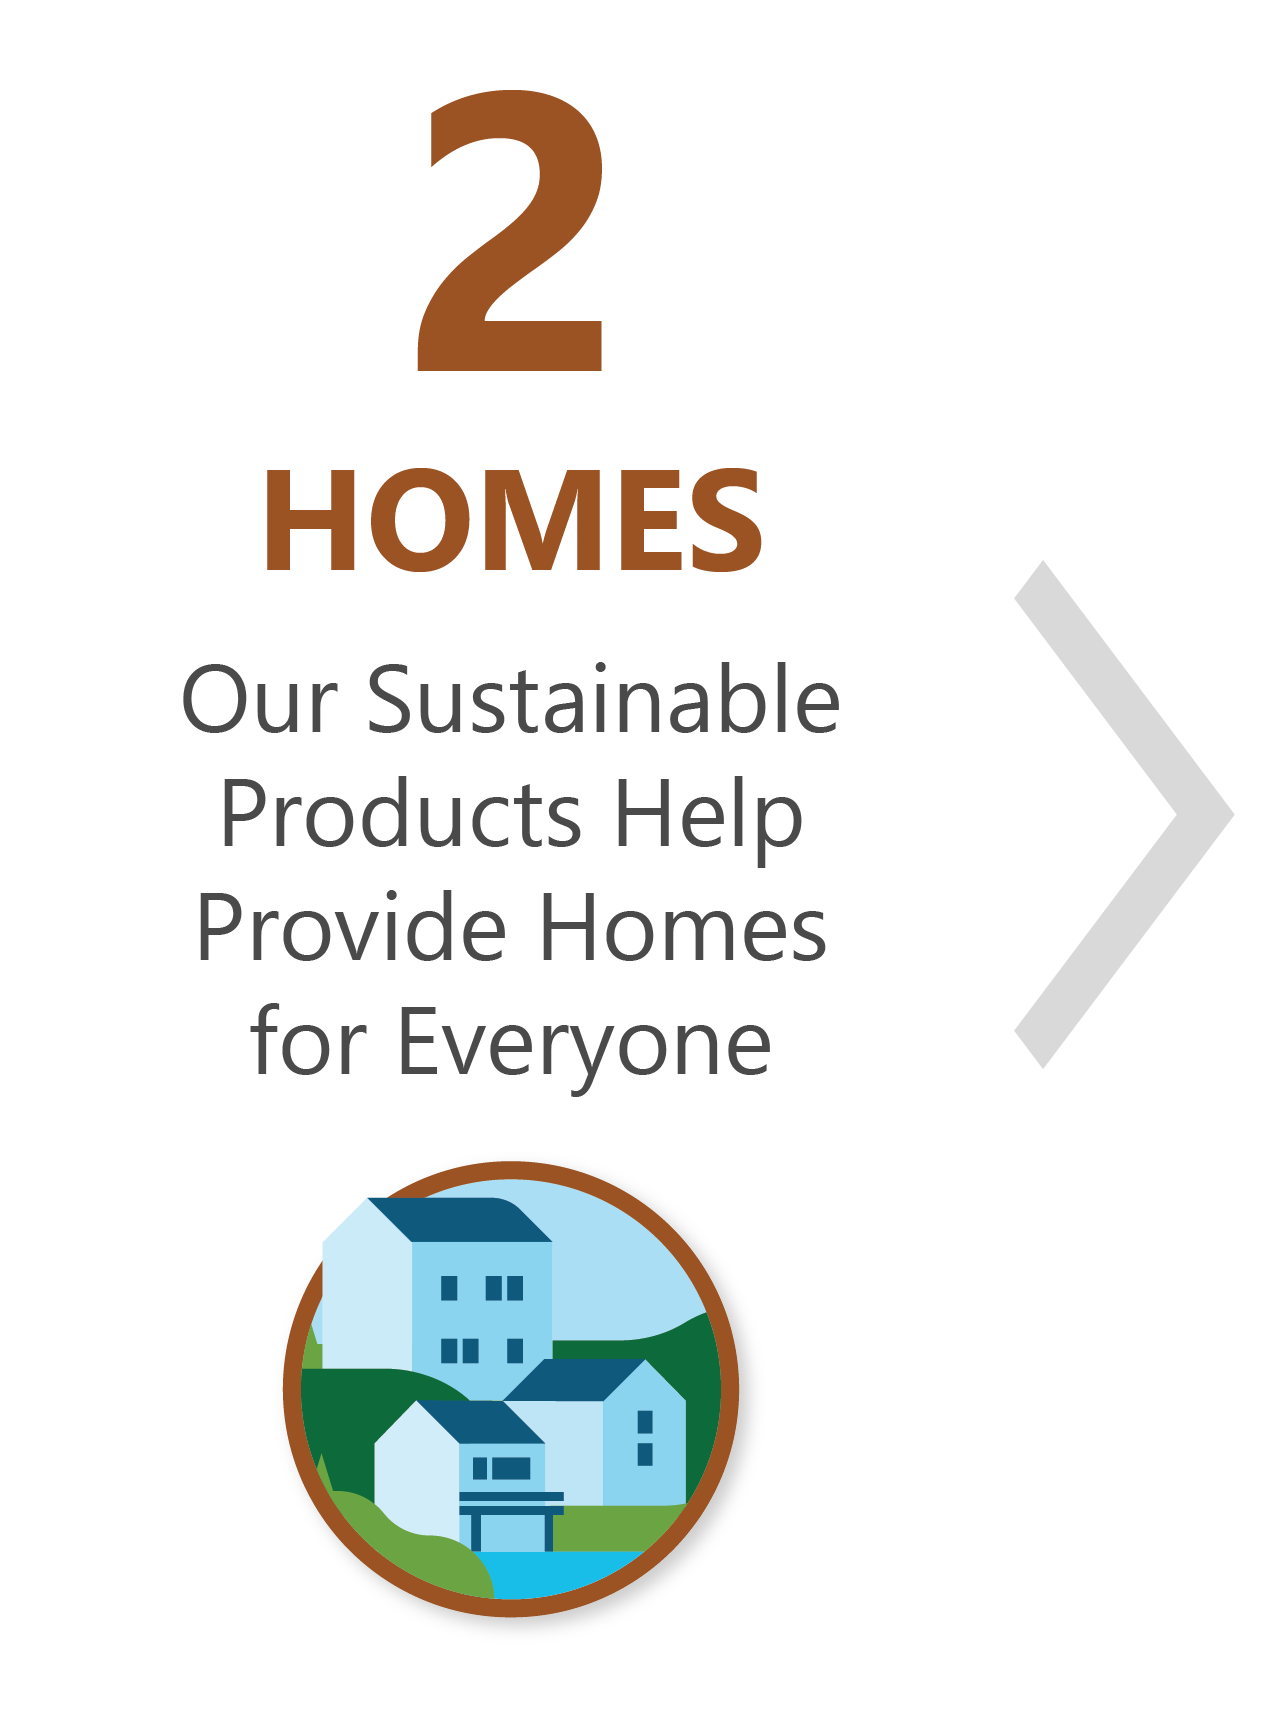 Our Sustainable Products Help Provide Homes For Everyone